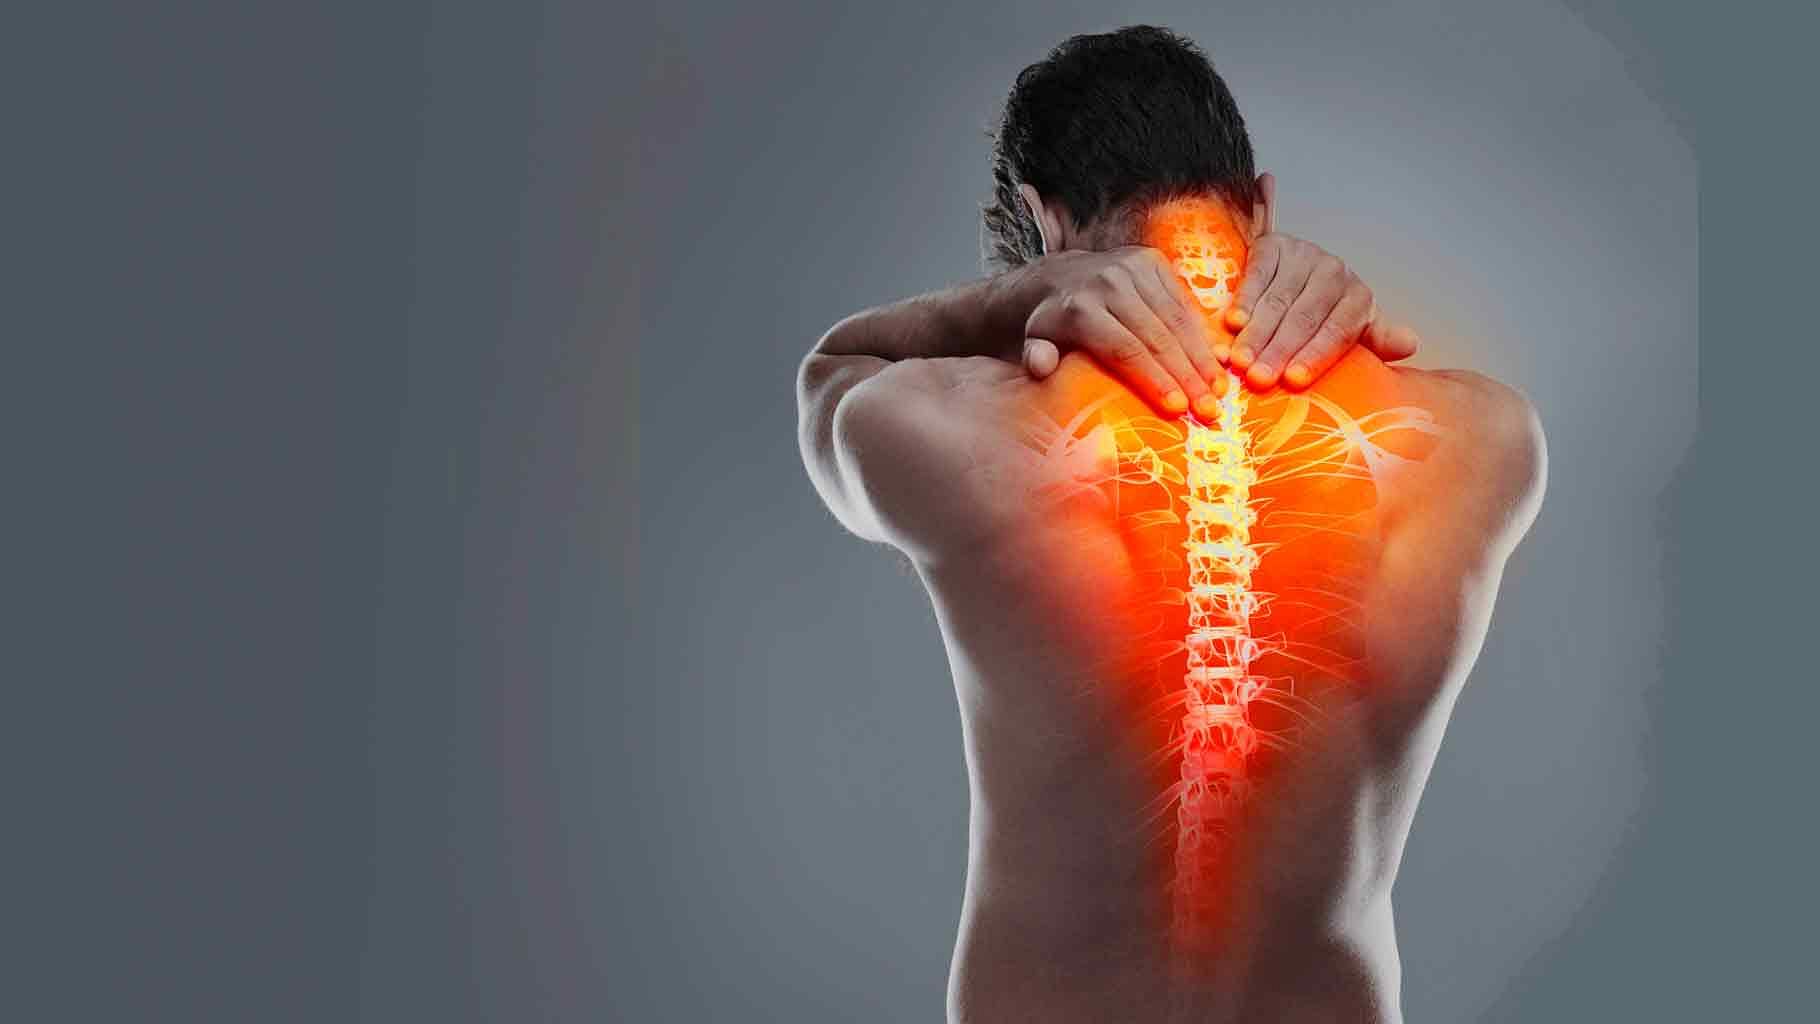 Chances are at some point in your 20s or 30s you will be advised physiotherapy to recover from the nasty effects of a sedentary life. Don’t fall in the spinal trap, read our guide to zero in on the right physiotherapist (Photo: iStock)